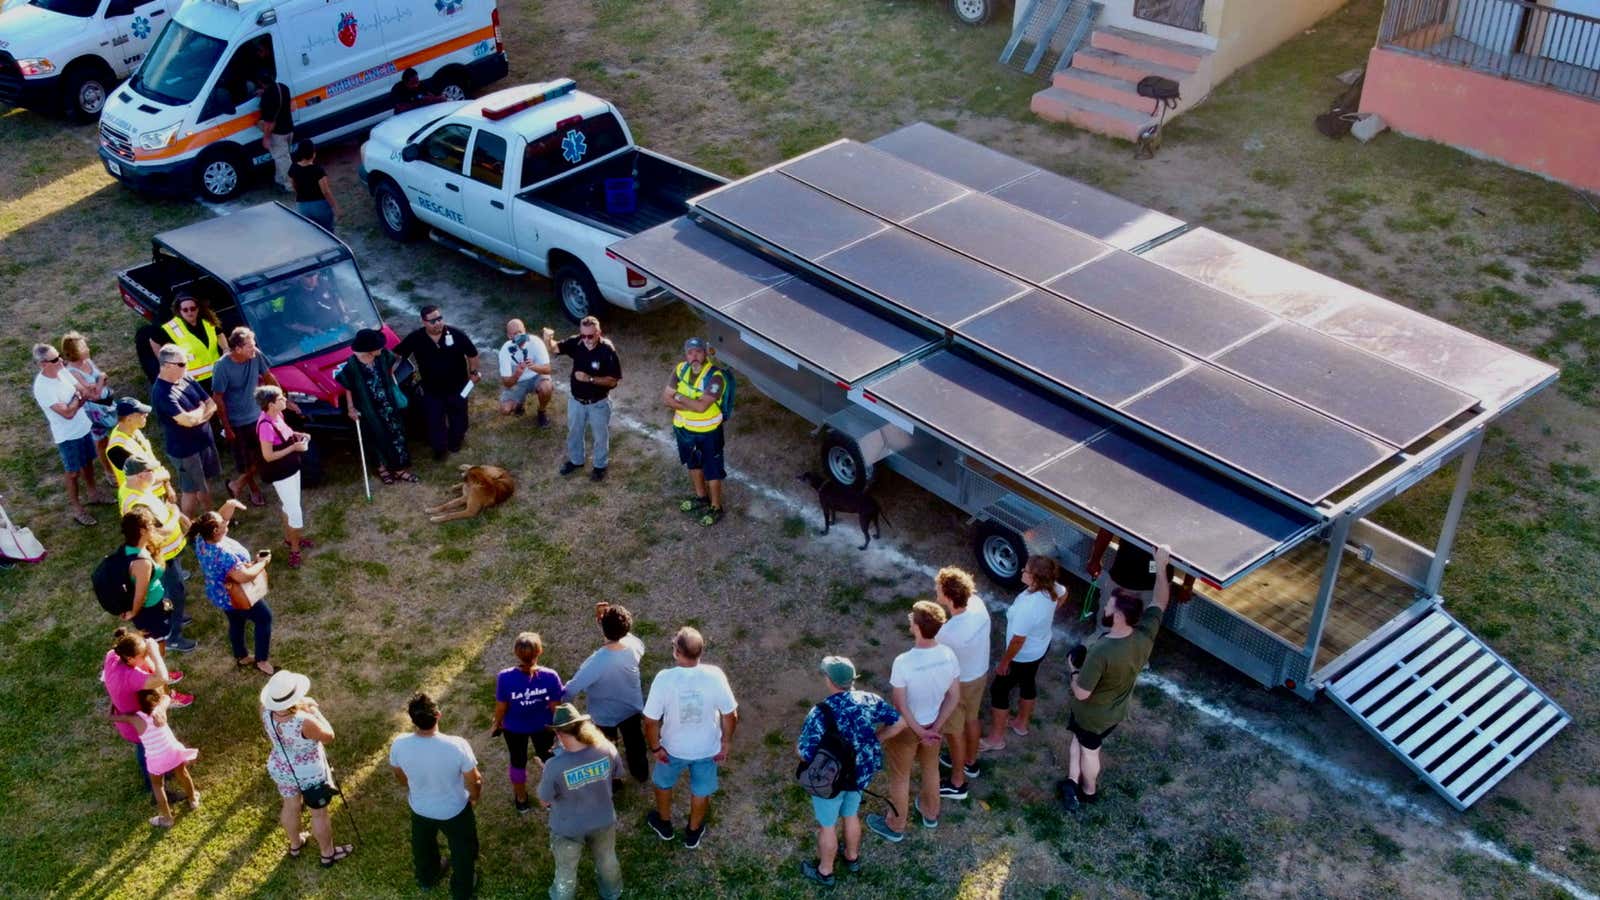 The Footprint Project deploys solar trailers to the sites of natural disasters. The group is on its way to New Orleans to provide electricity for the recovery from Hurricane Ida.